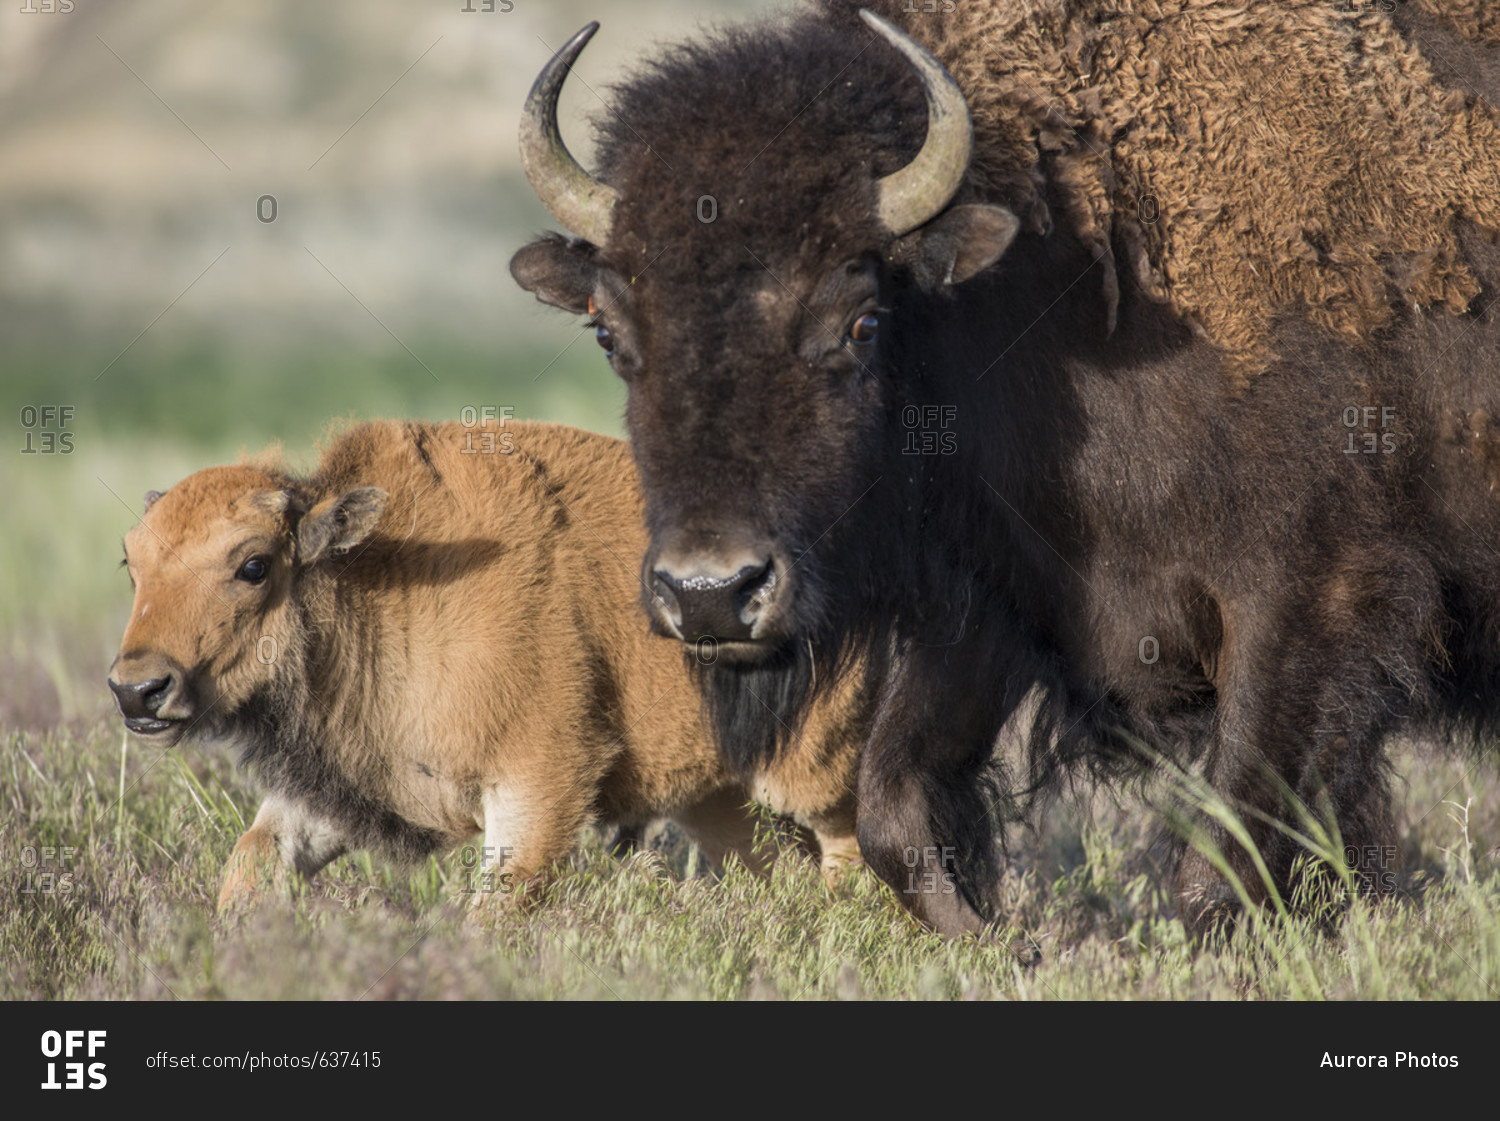 On Wednesday May 3, the first genetically pure bison calf was born on the Wind River Reservation, WY, in over 130 years. This birth follows the return of bison, traditionally called buffalo by Native American tribes, when 10 animals were released last Nov